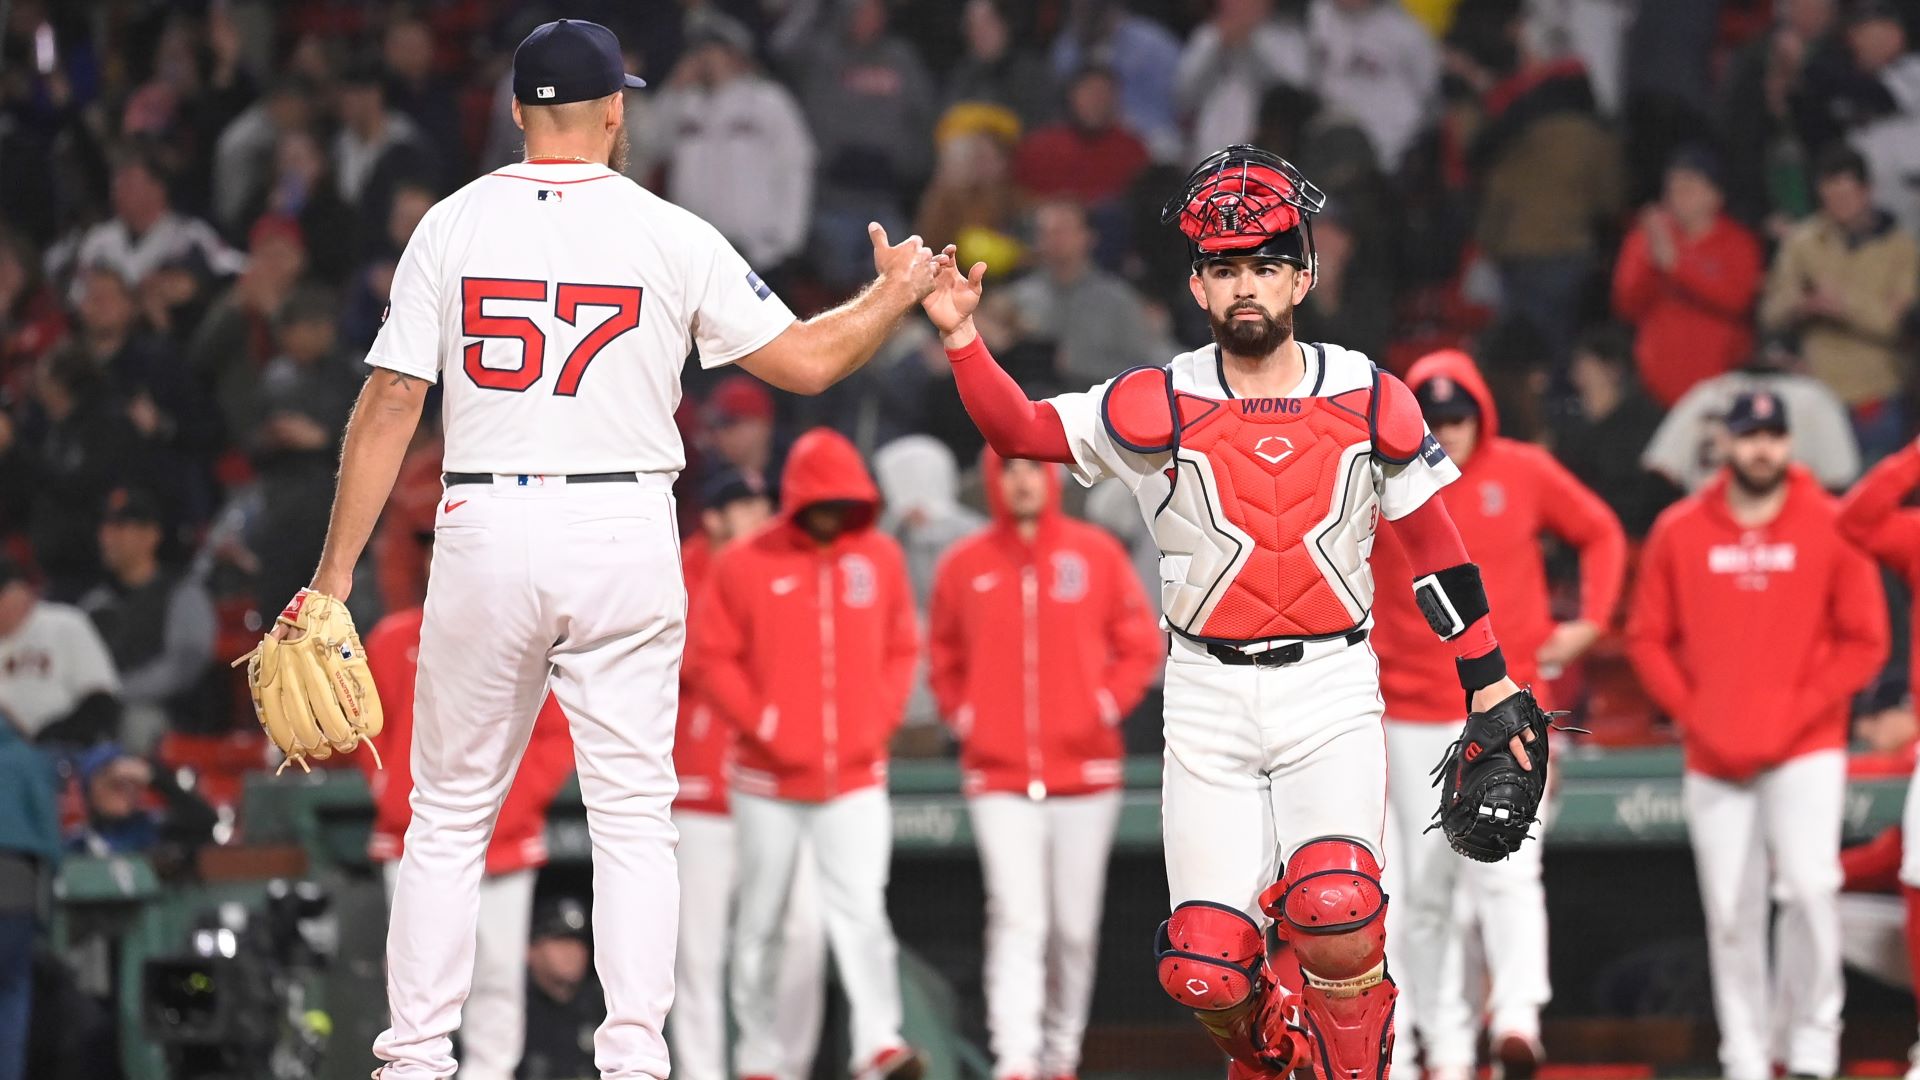 Connor Wong Driving Highly-Productive Red Sox Catching Duo